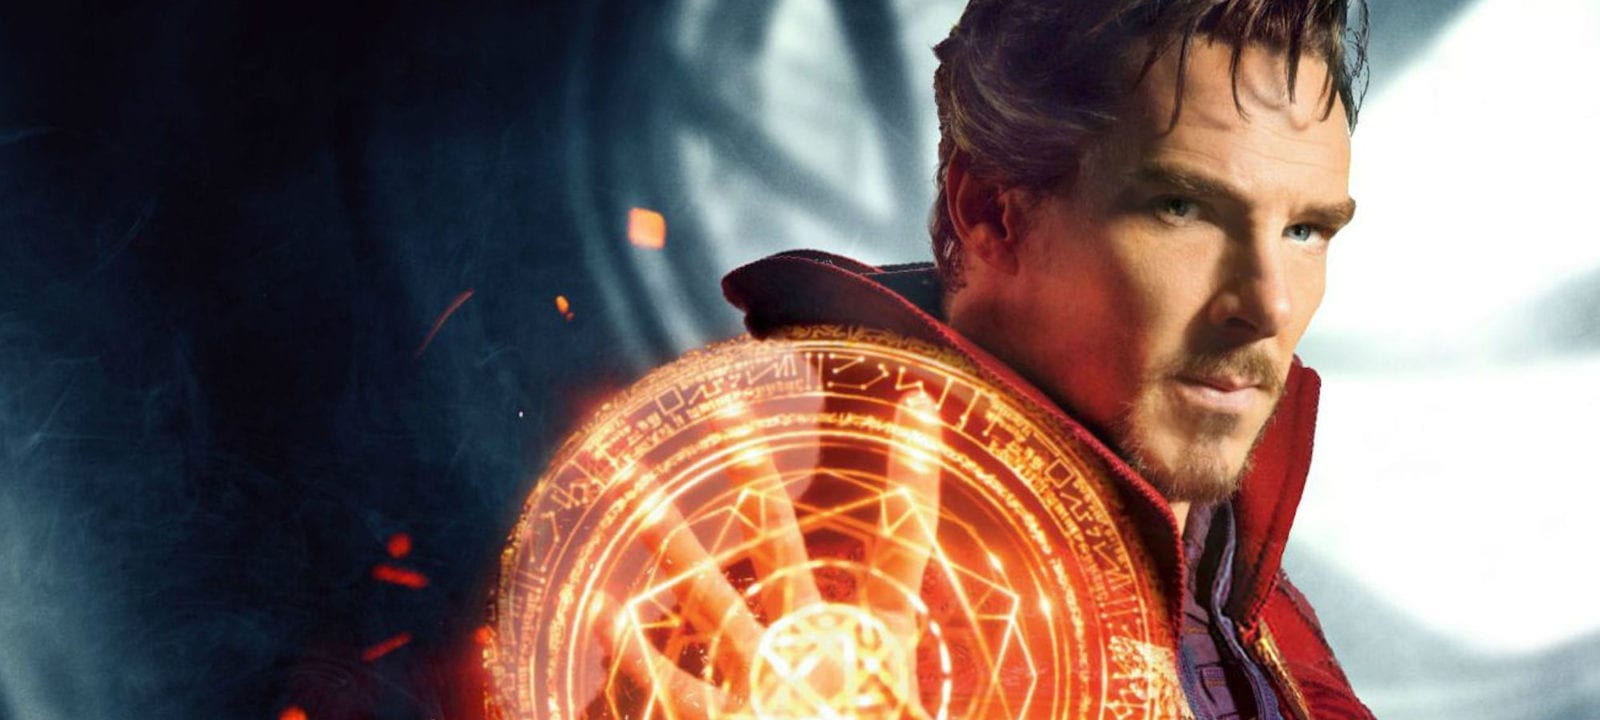 Insights From Dr. Strange – Reorient The Spirit To Better Heal The Body